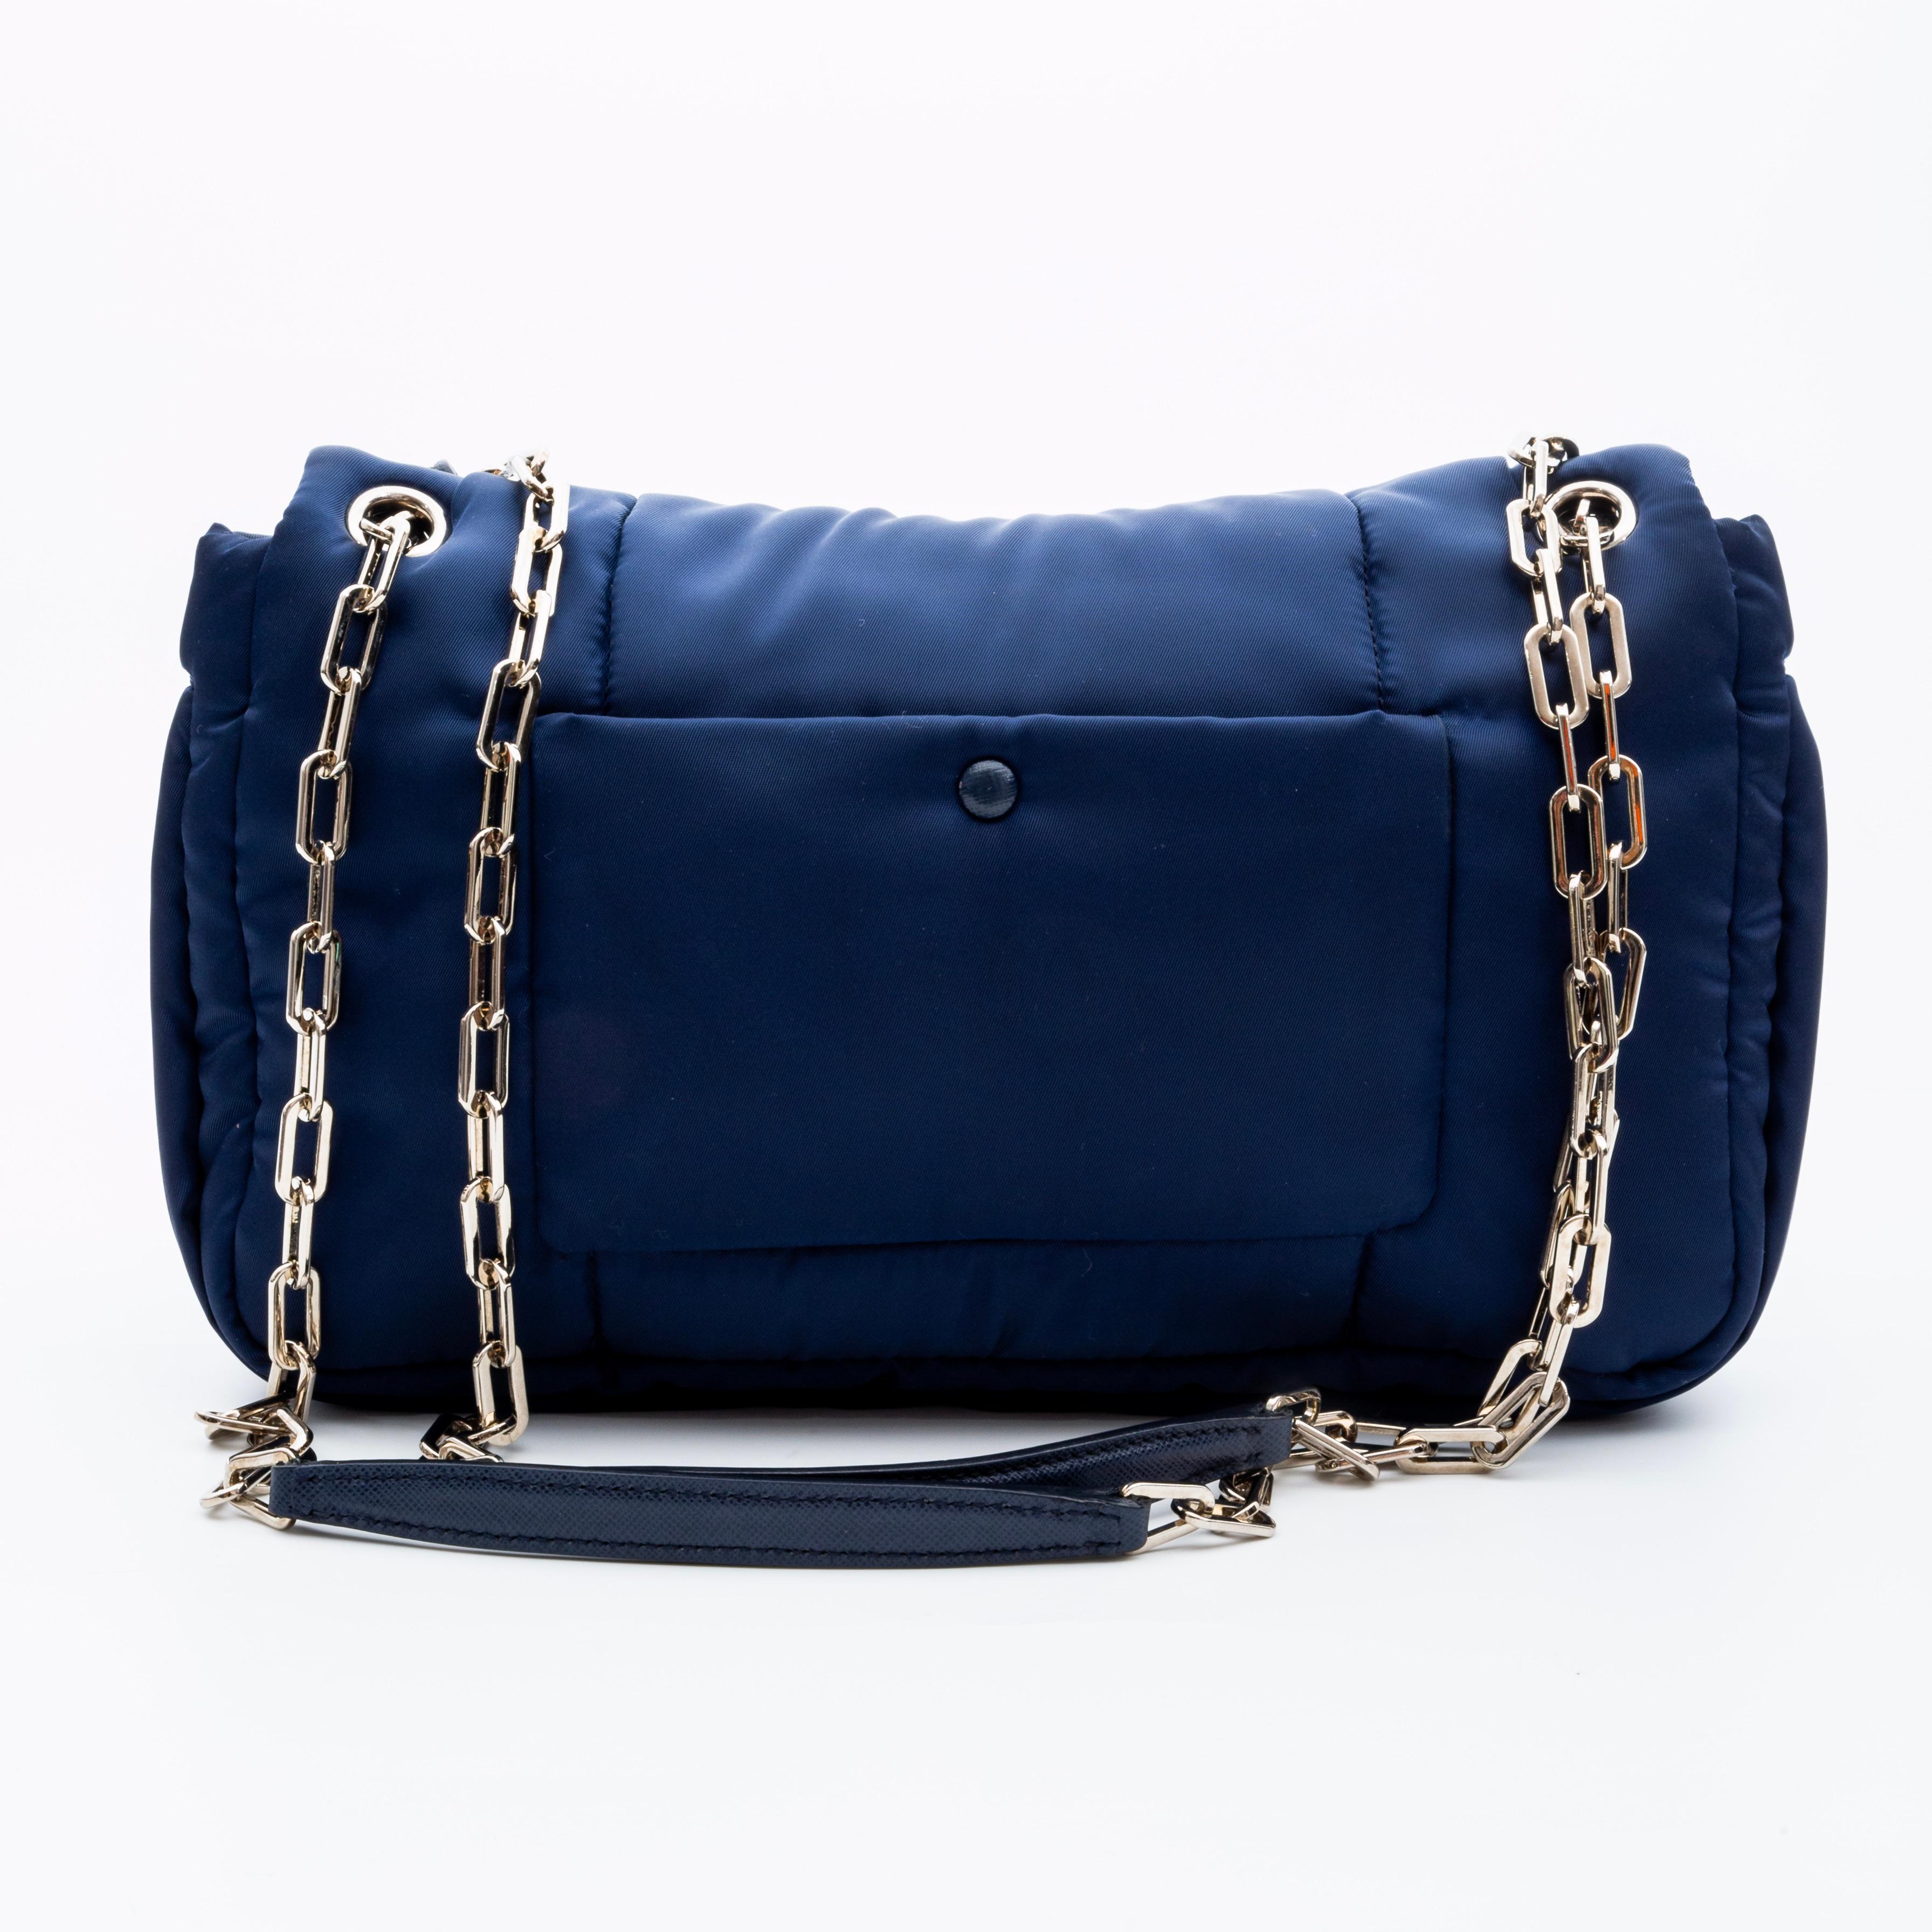 COLOR: Navy blue
MATERIAL: Nylon
ITEM CODE: 25
MEASURES: H 7” x L 11” x D 3”
DROP: 11.5” (both straps)
DROP: 22” (single strap)
COMES WITH: Dust bag and box, certificate from Real Authentication
CONDITION: Like new. Pristine.

Made in Italy